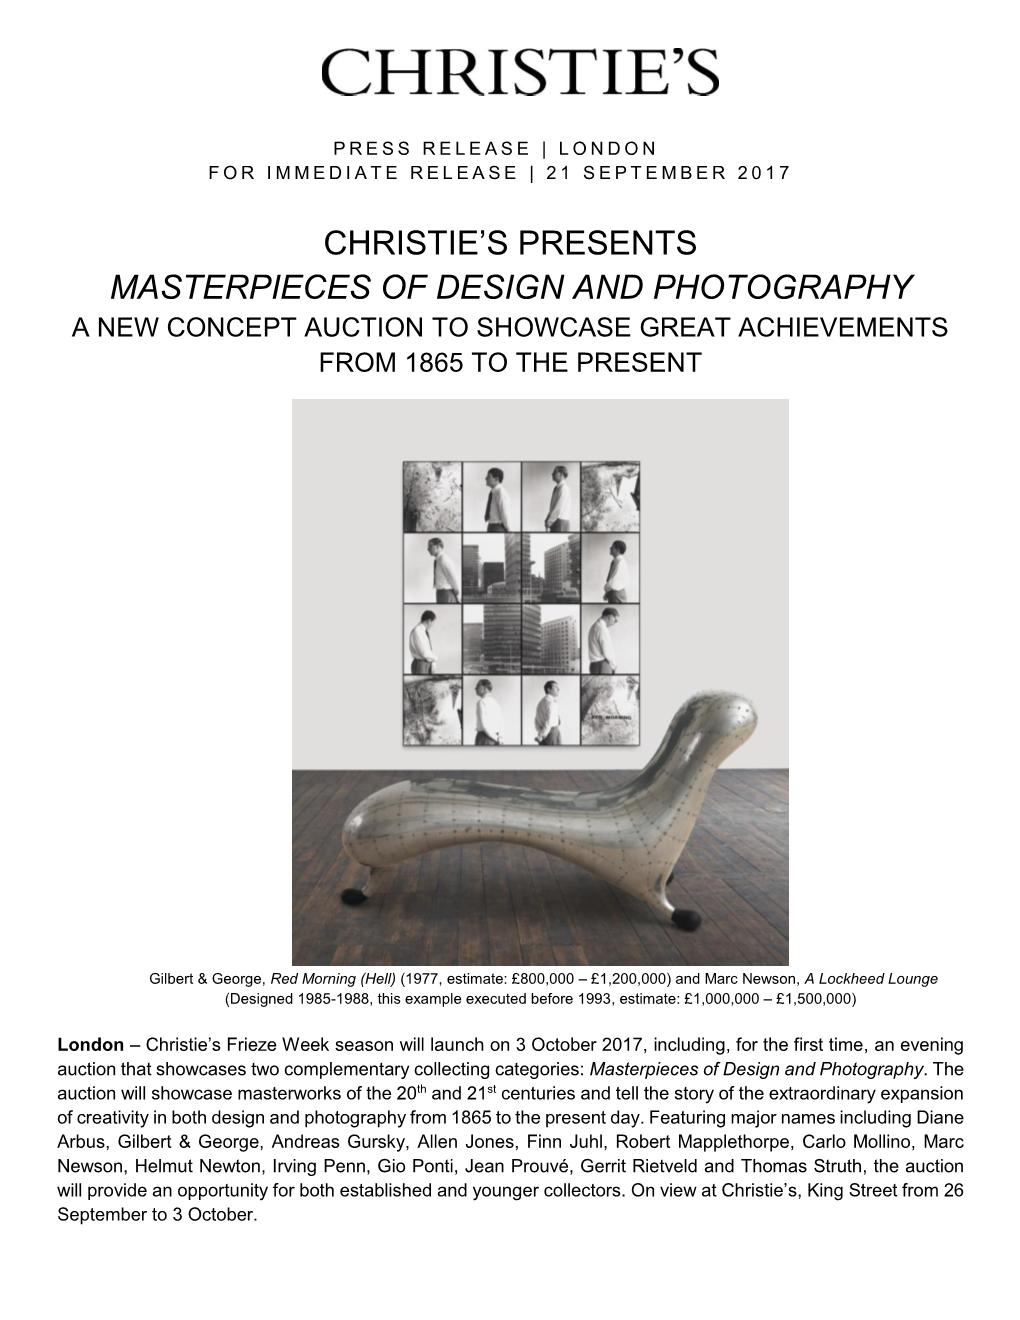 Christie's Release, Masterpieces of Design and Photography 3 October